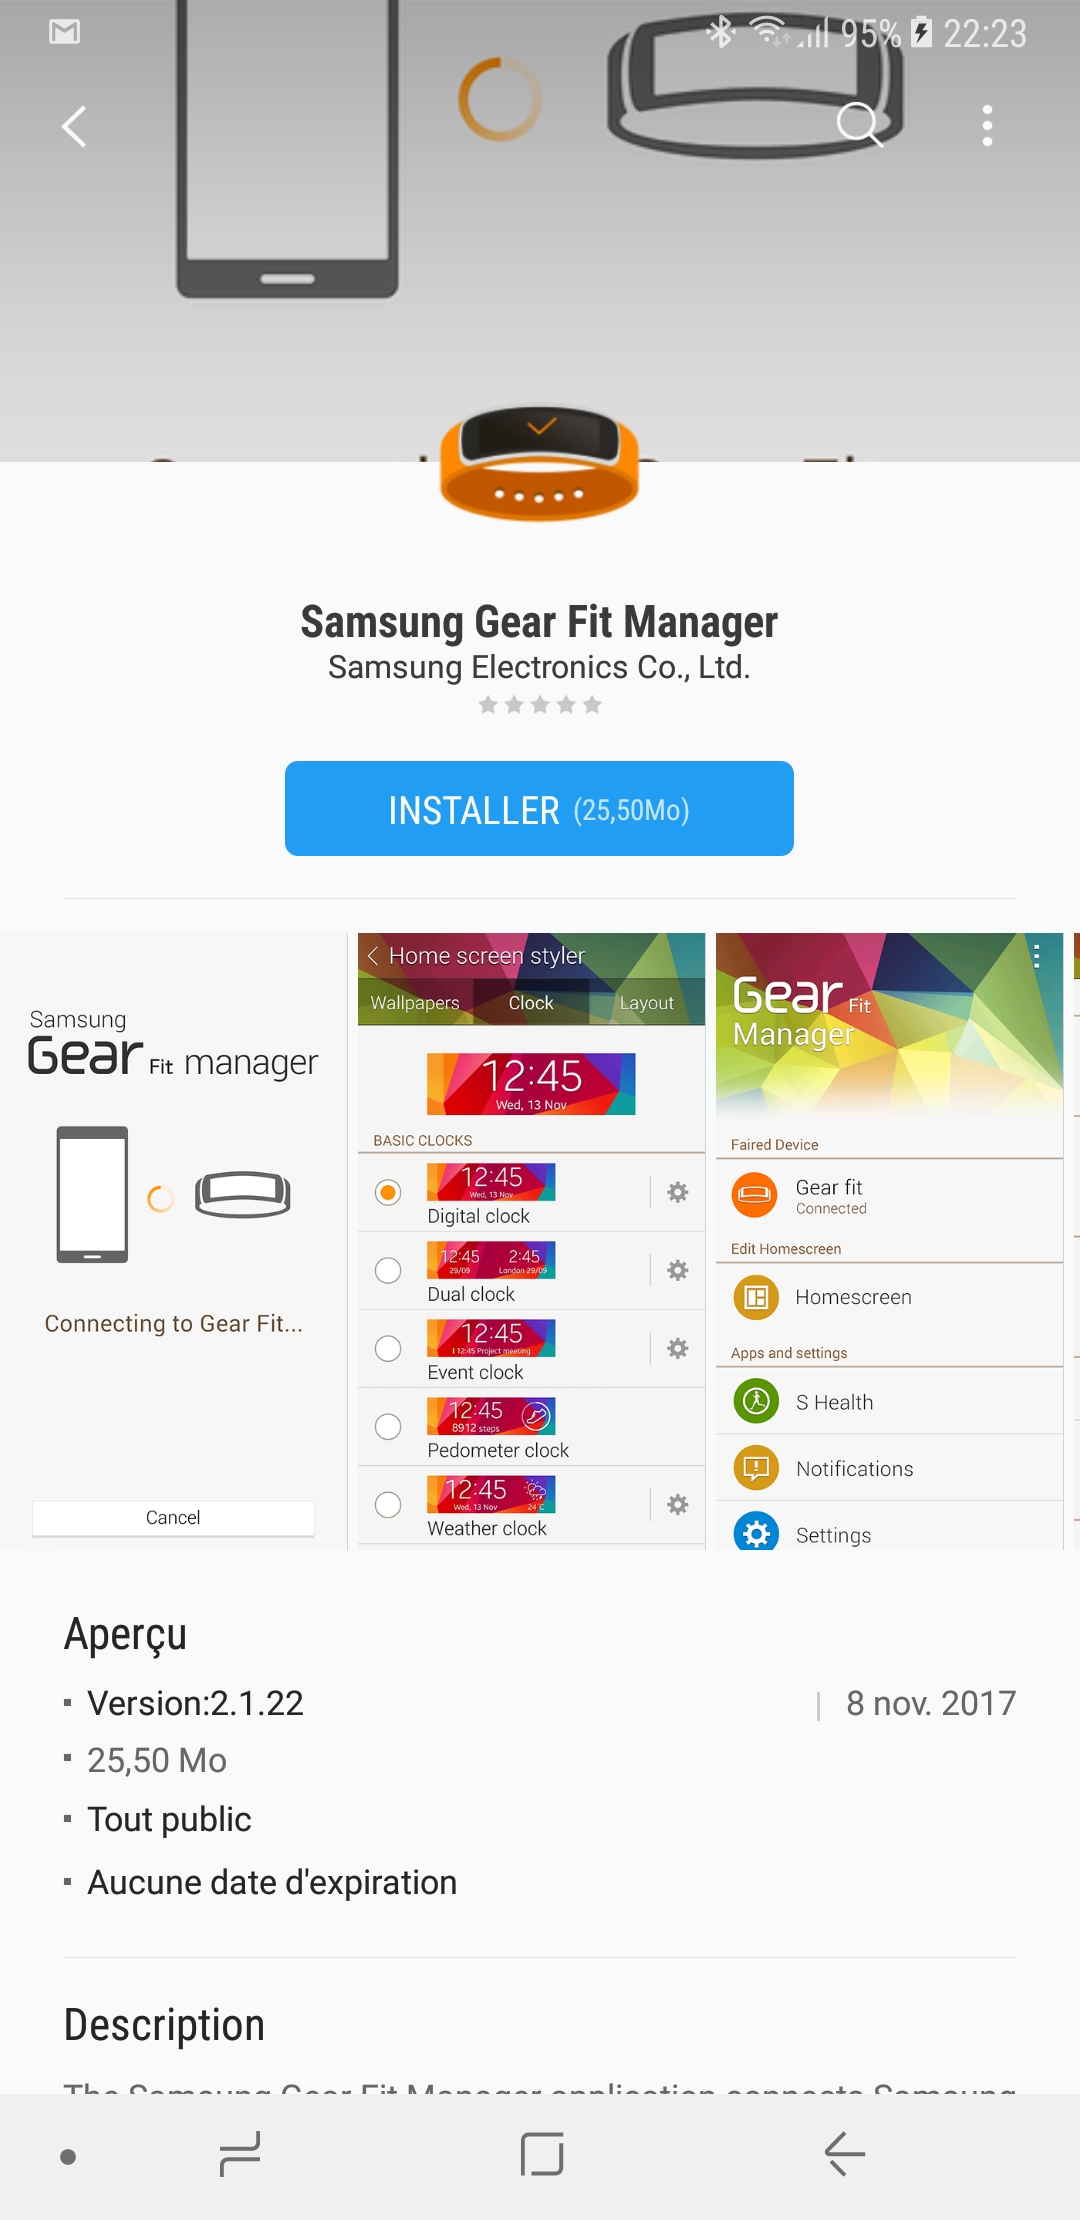 samsung gear fit manager (application) - Samsung Community